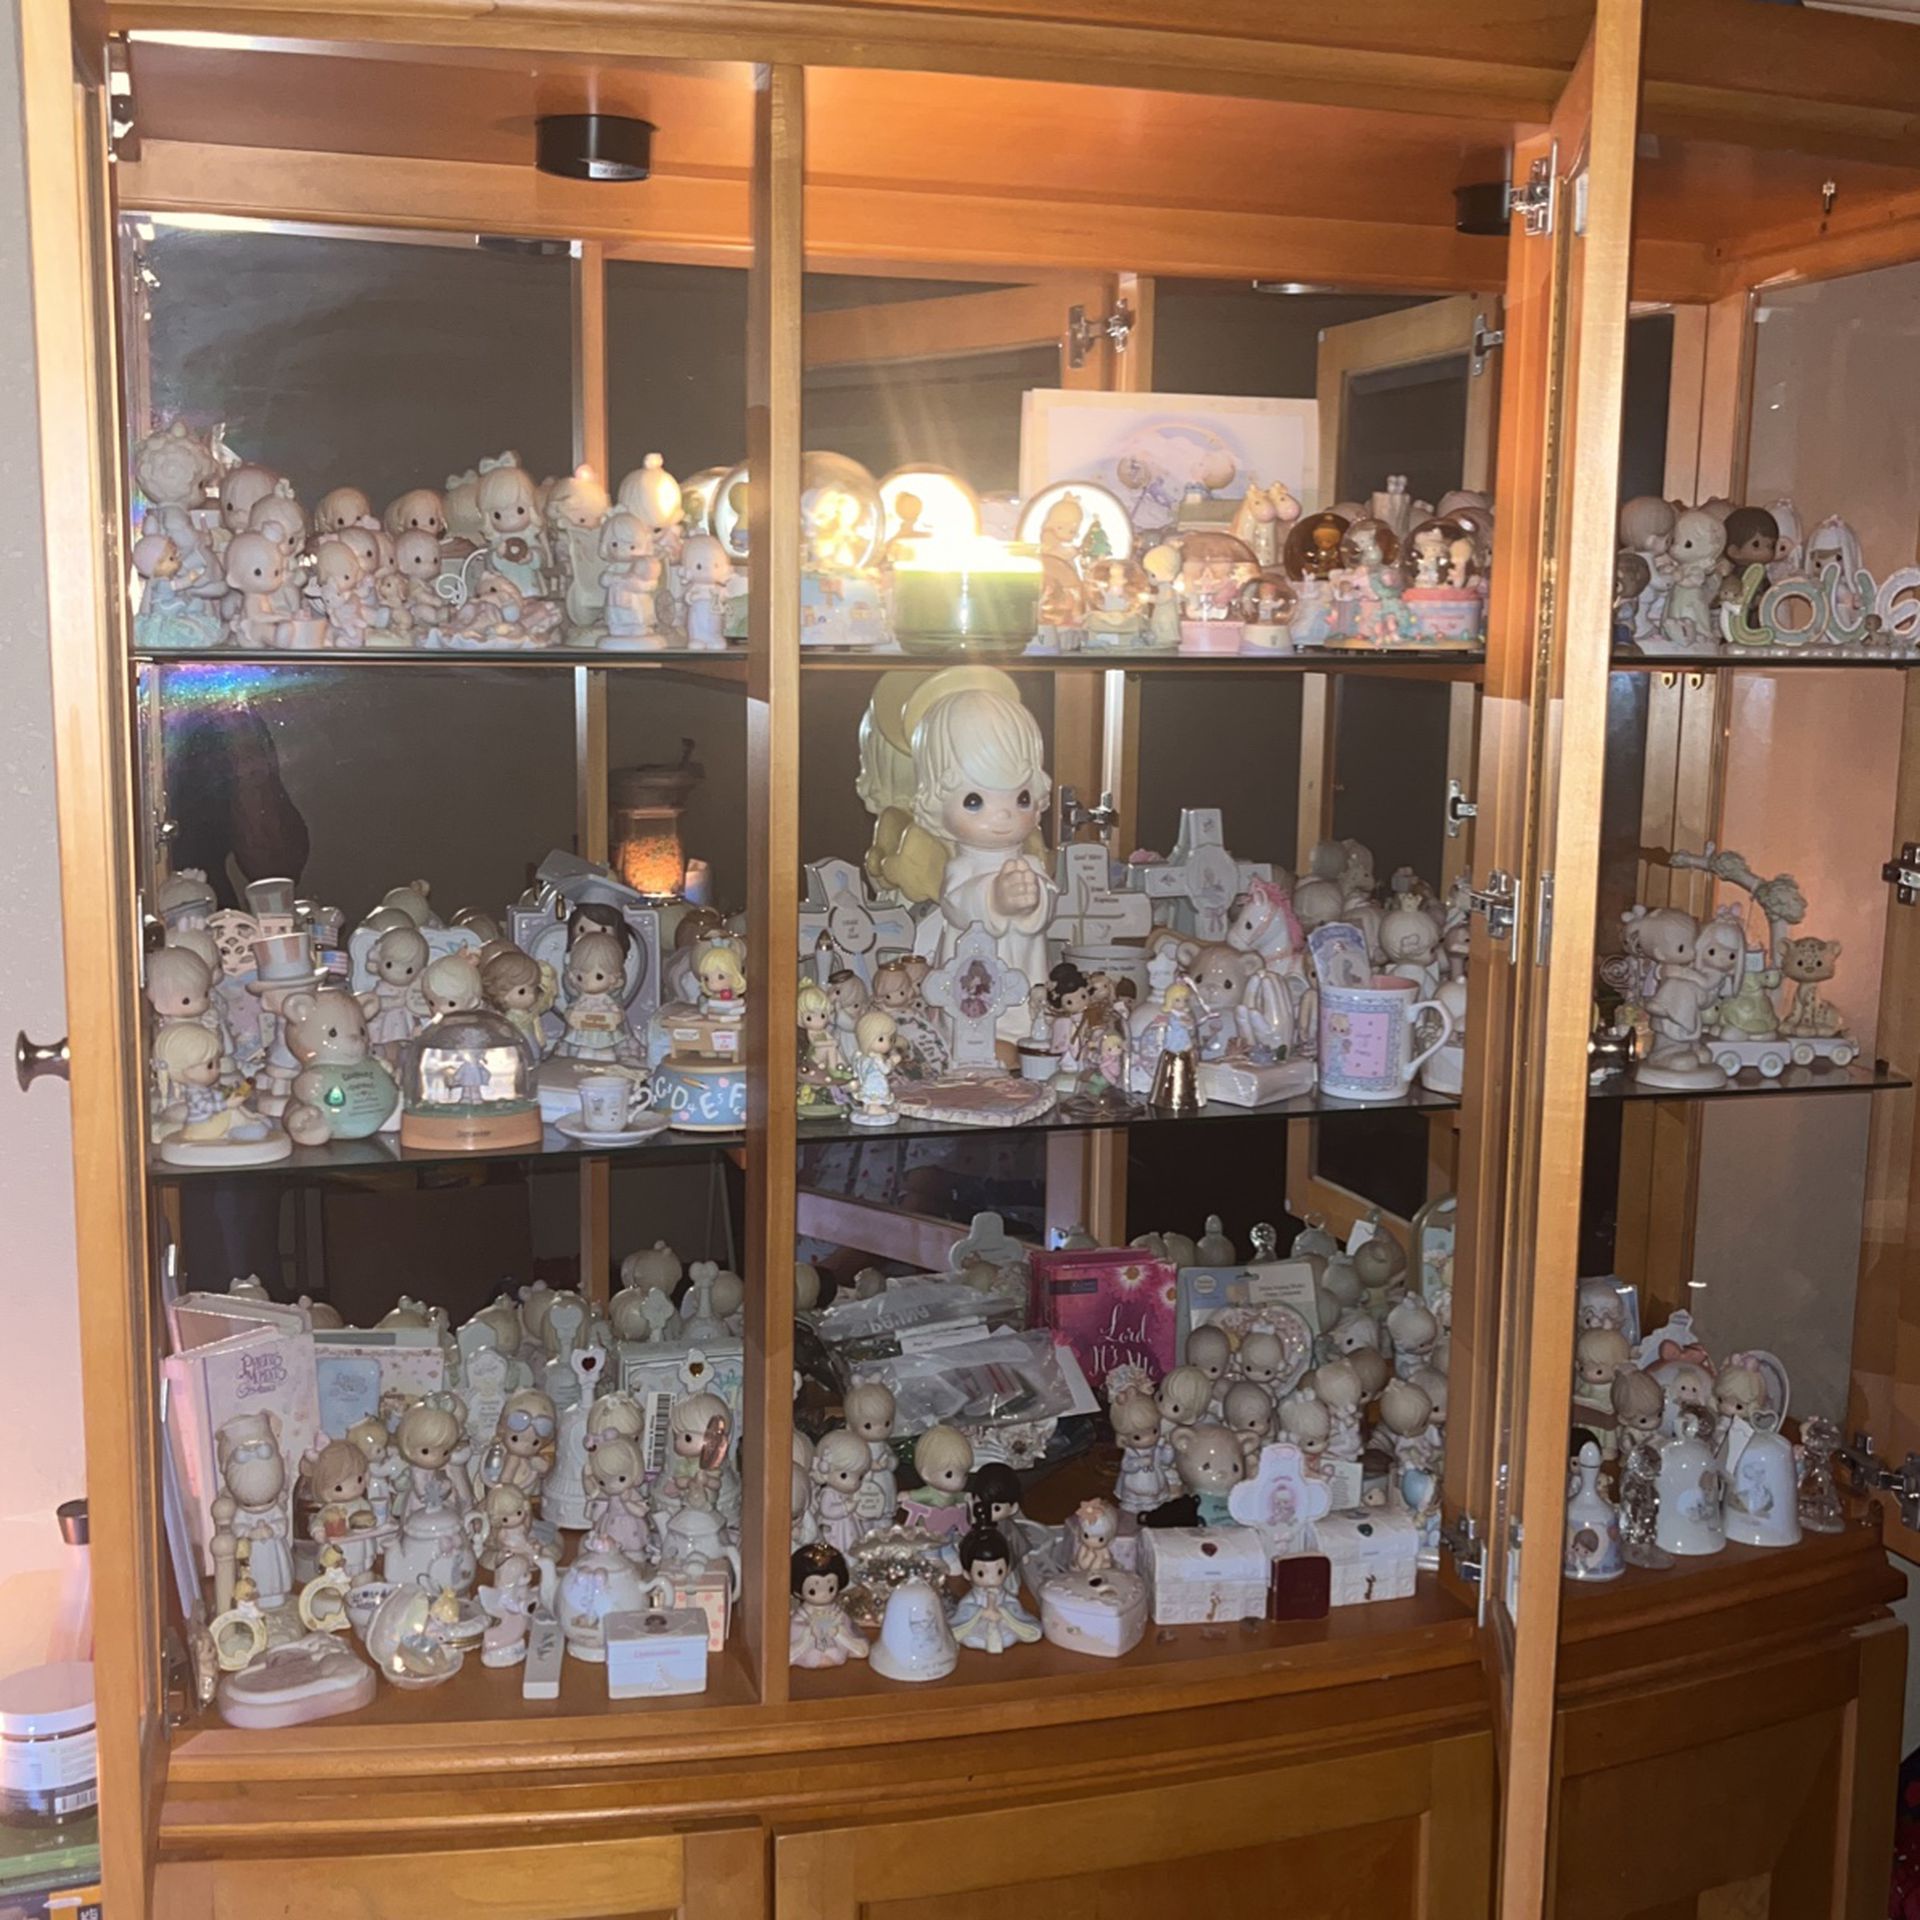 China Cabinet With Precious Moments Collection